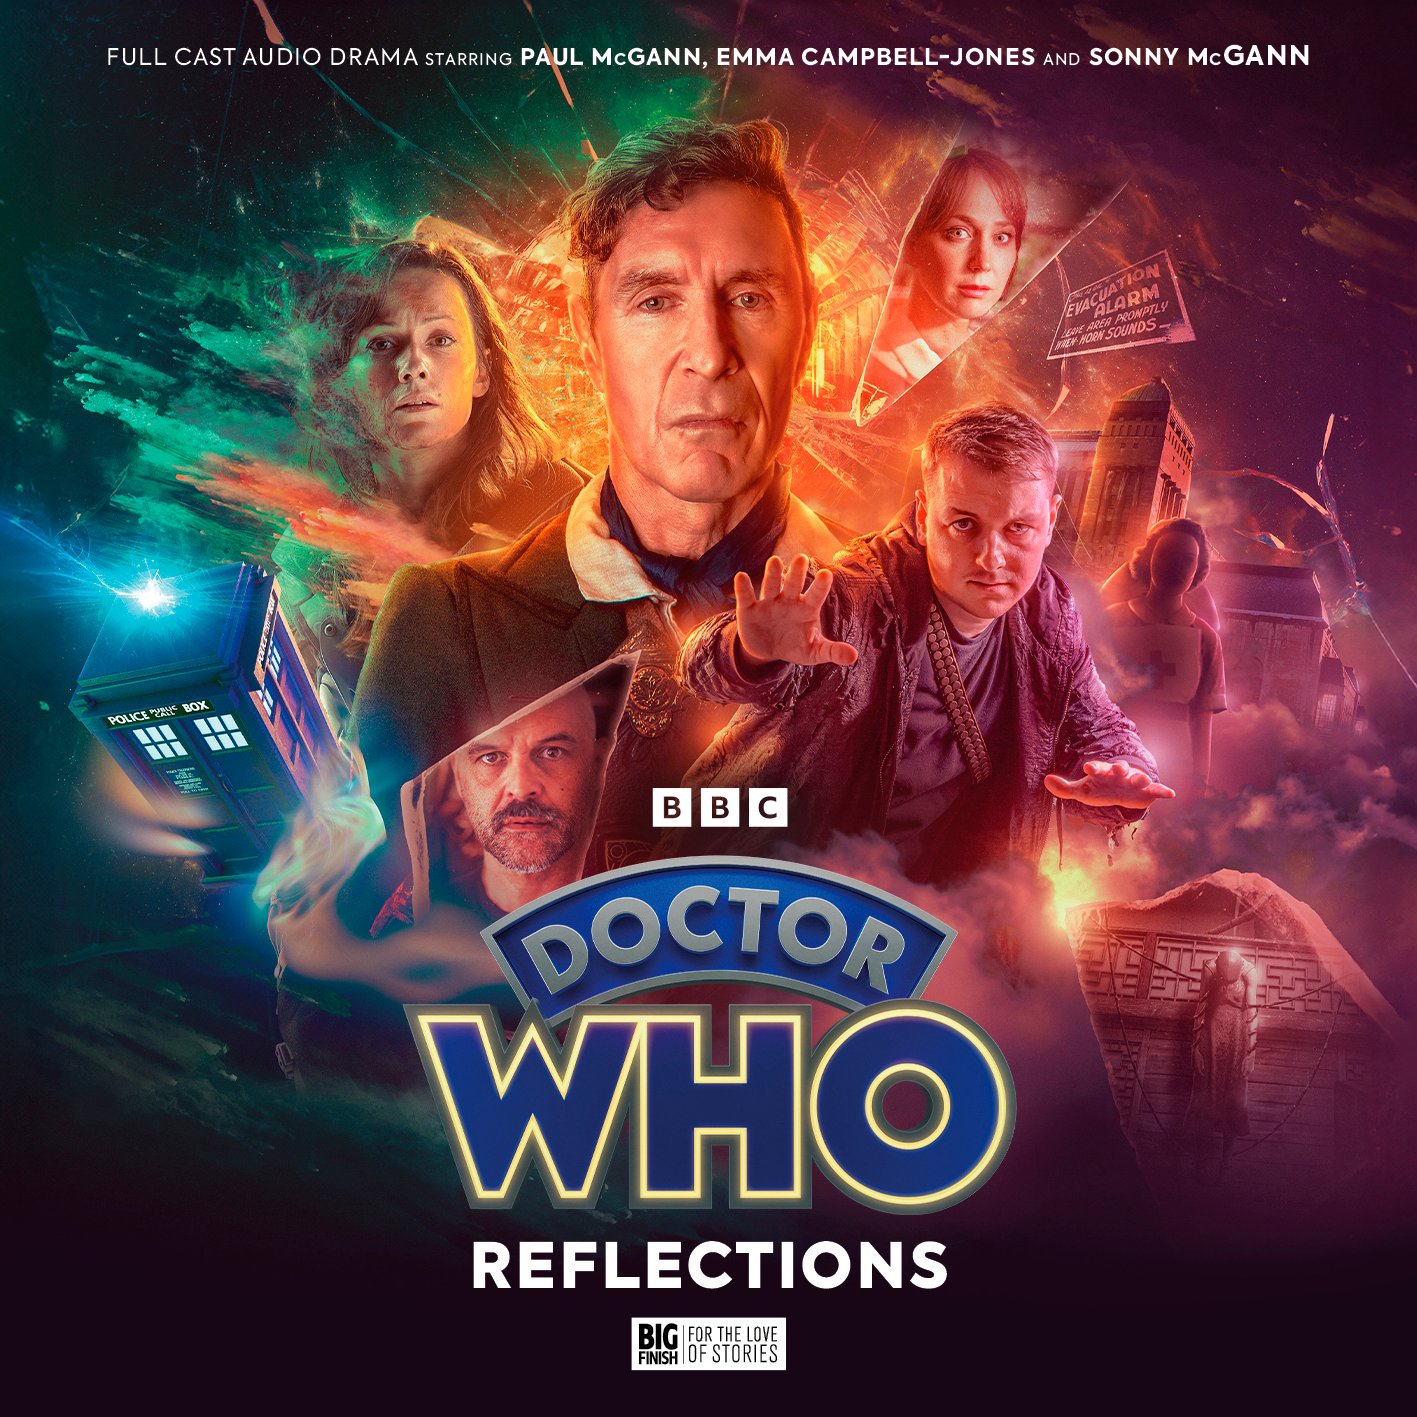 Paul McGann’s Eighth Doctor Returns to the Time War in Big Finish’s Doctor Who: Reflections